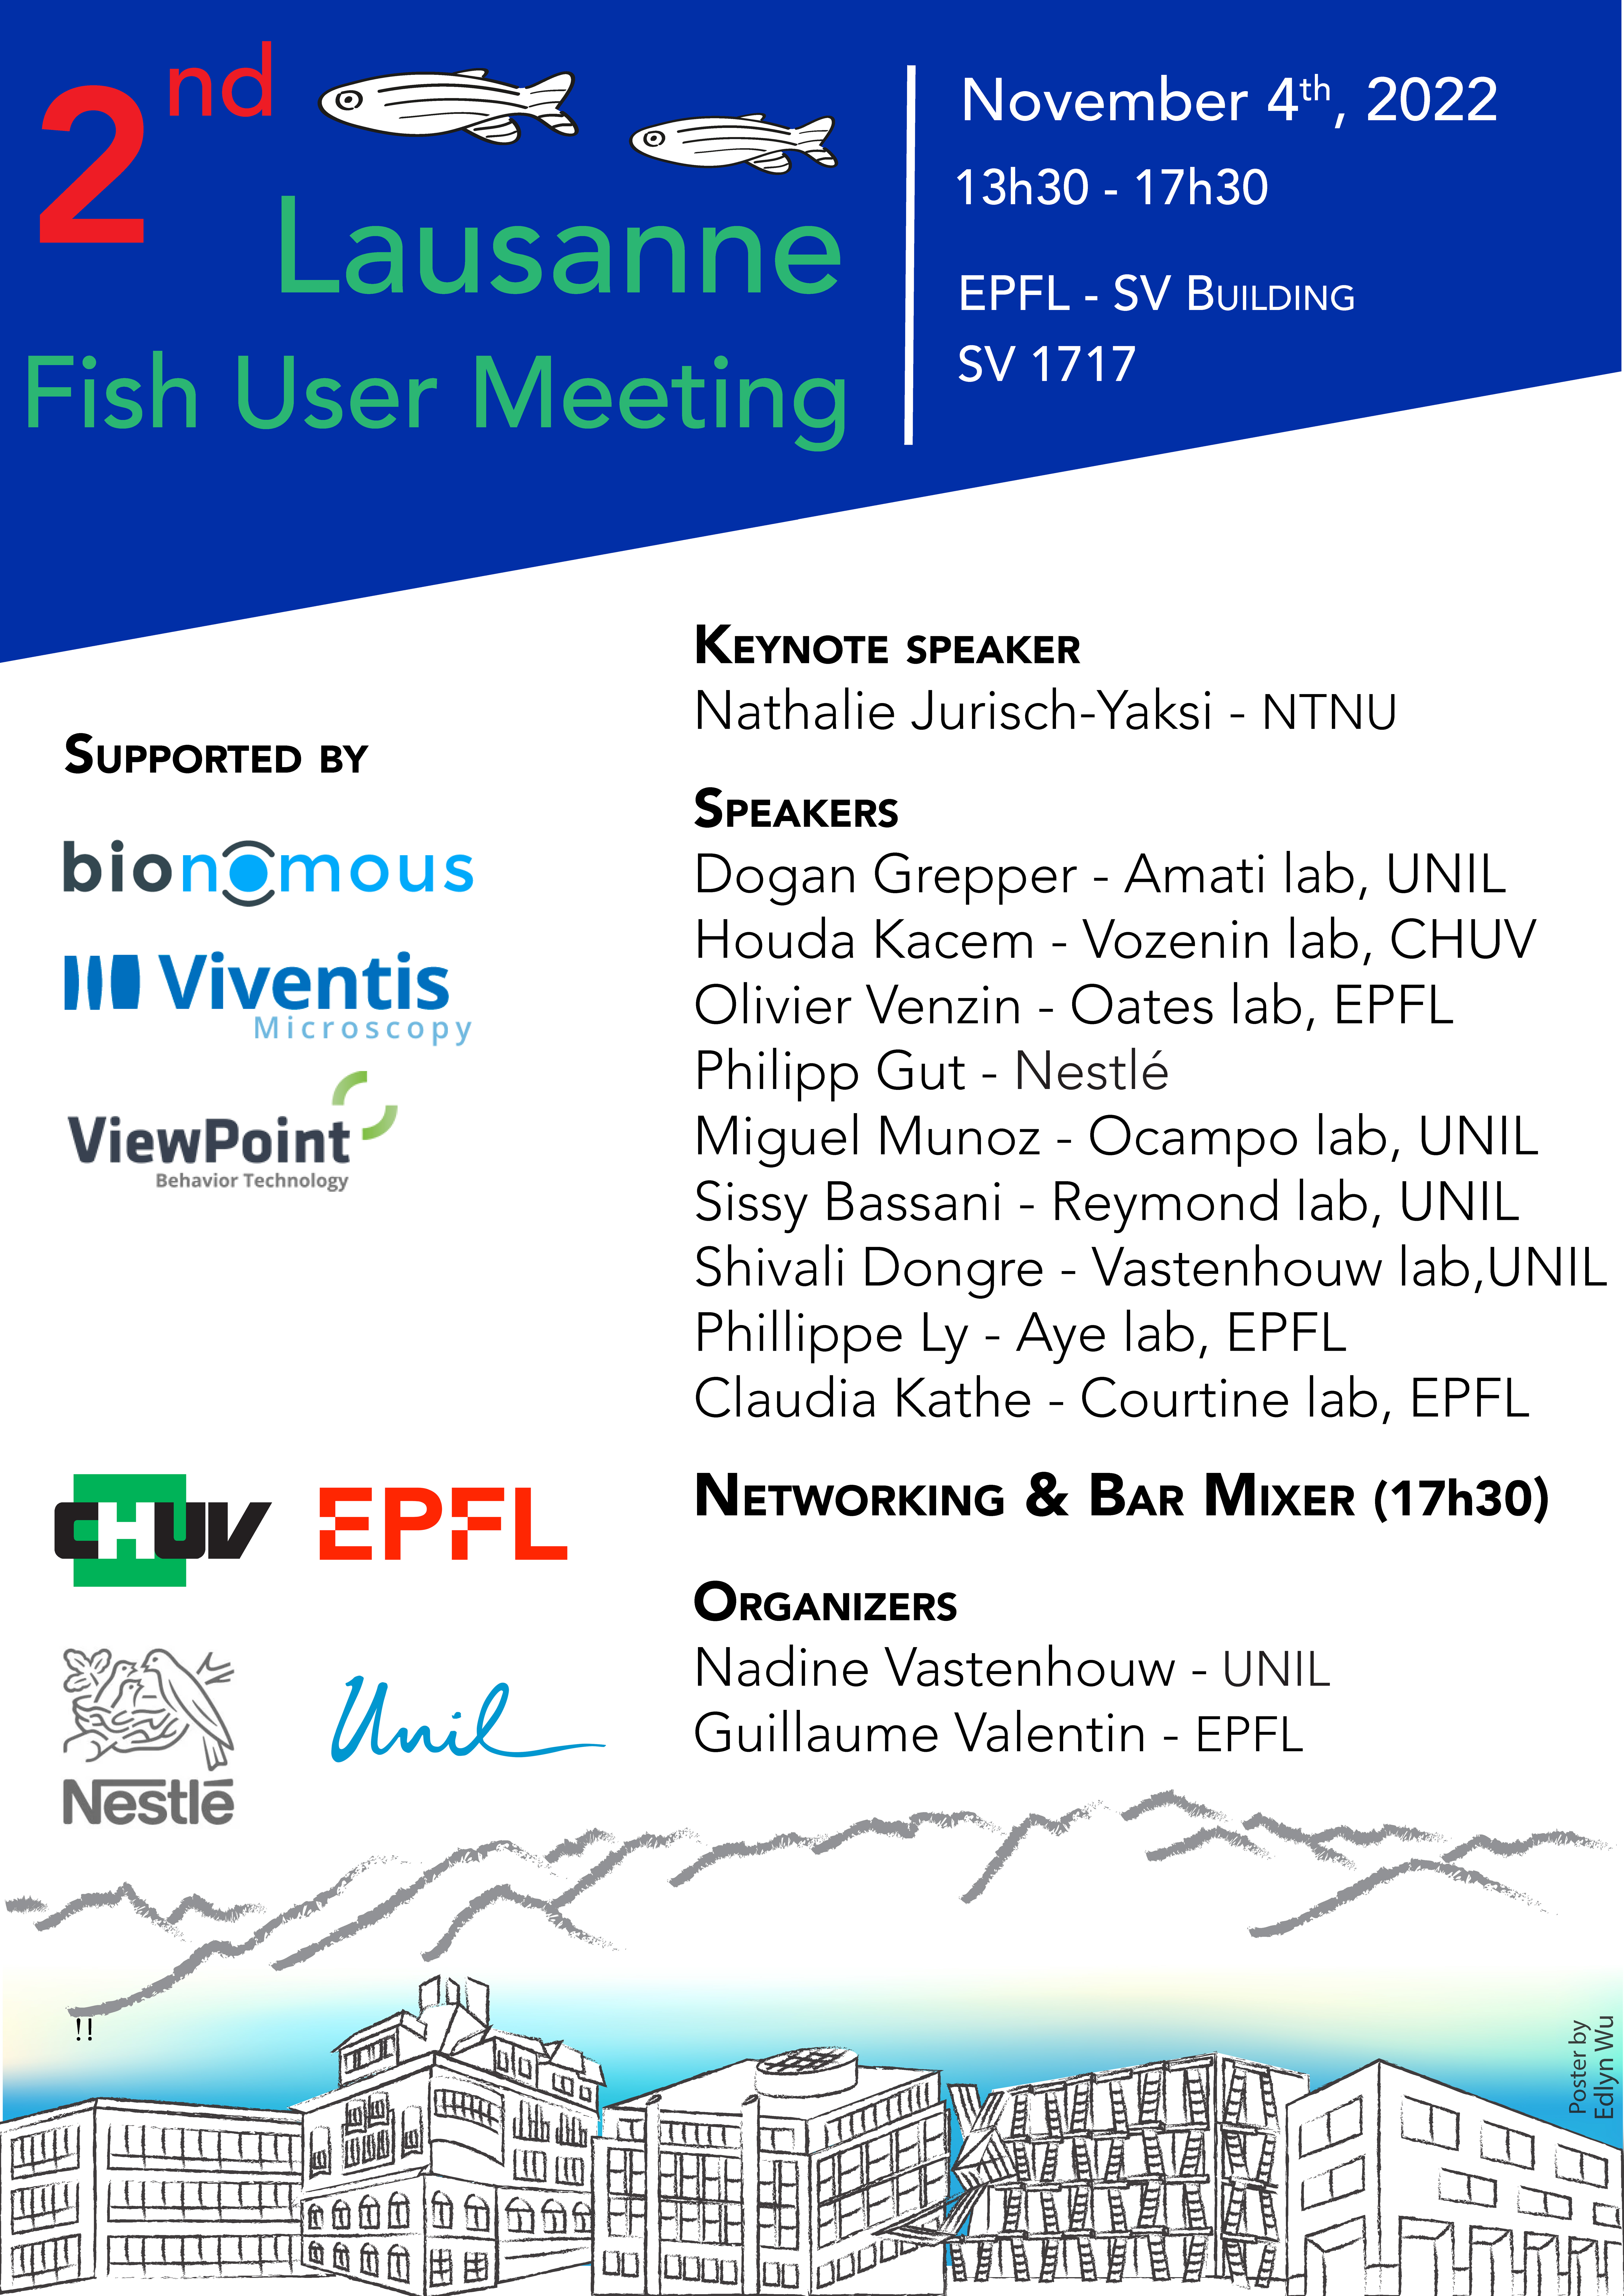 2nd Lausanne Fish User Meeting